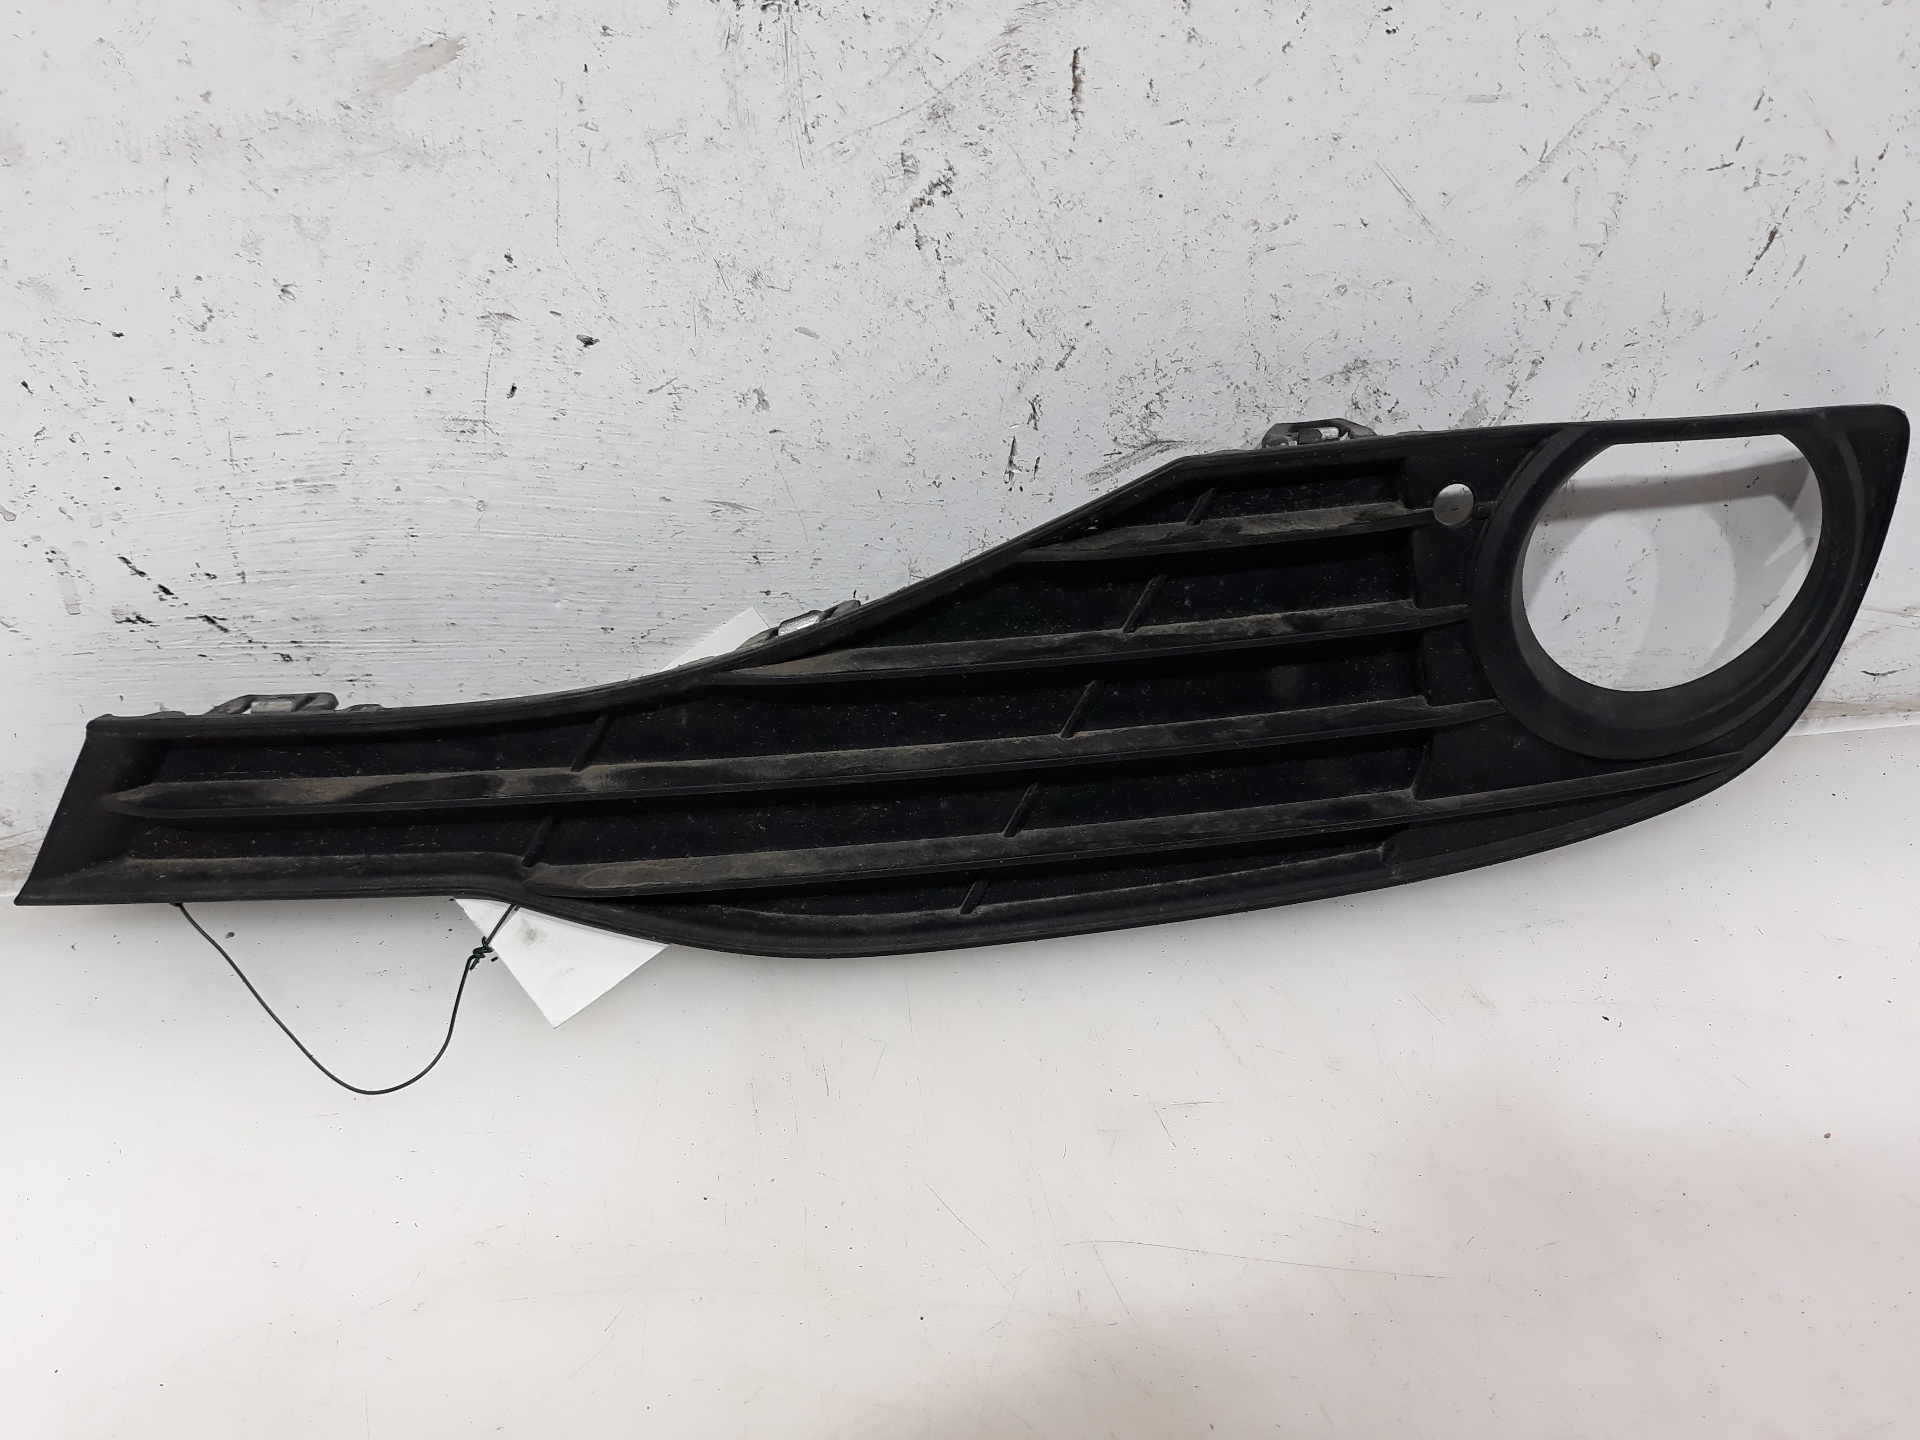 BMW 3 Series F30/F31 (2011-2020) Front Left Grill 51117255365, 51117255365 25086301